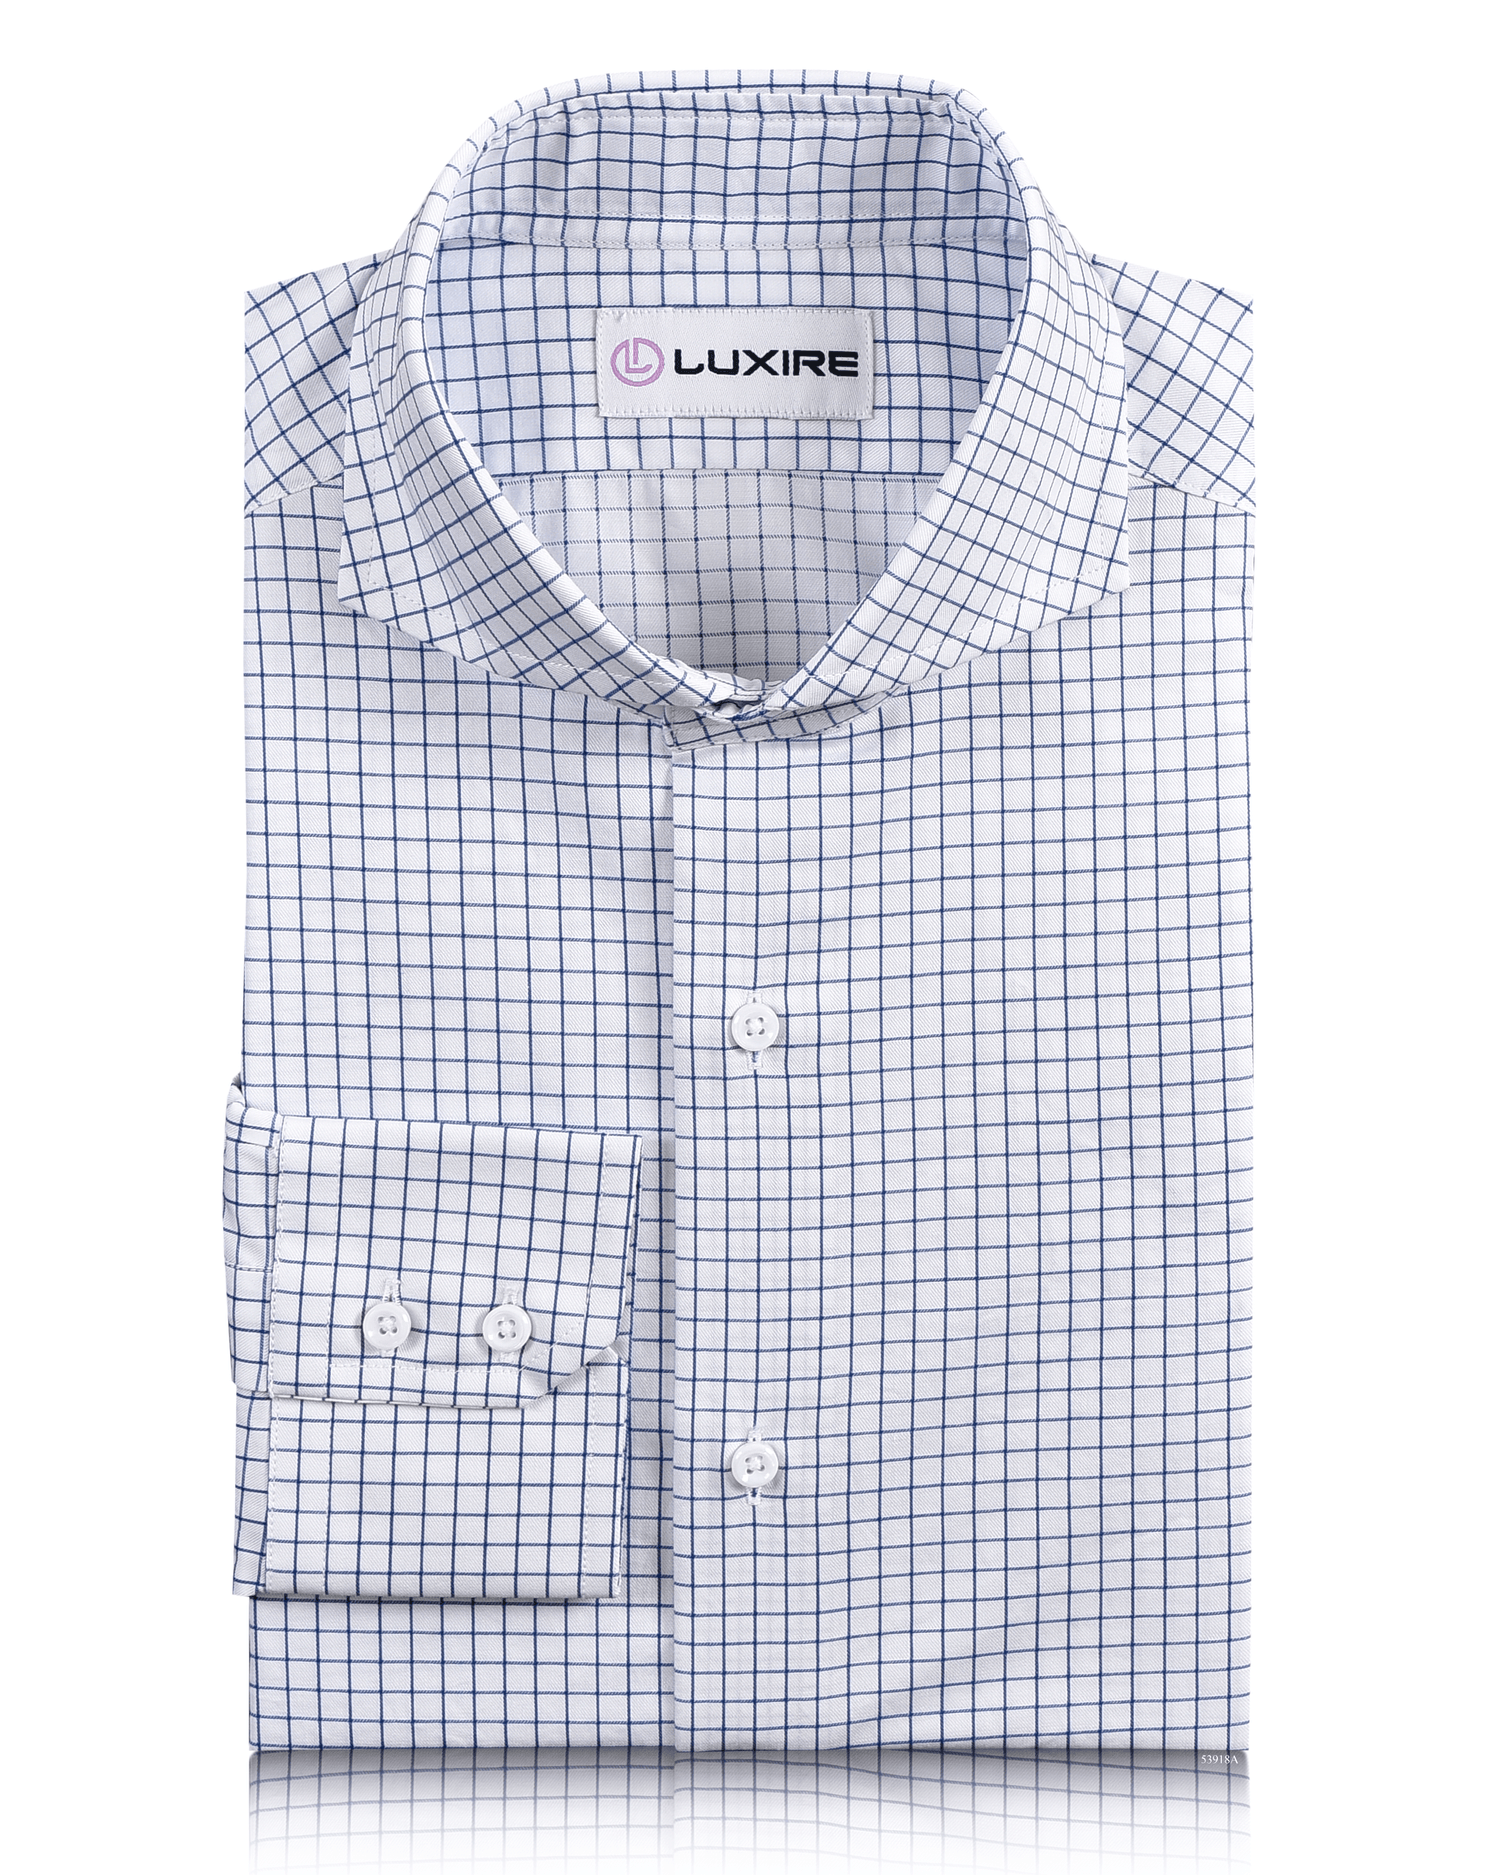 Front view of custom check shirts for men by Luxire monti blue graph twill